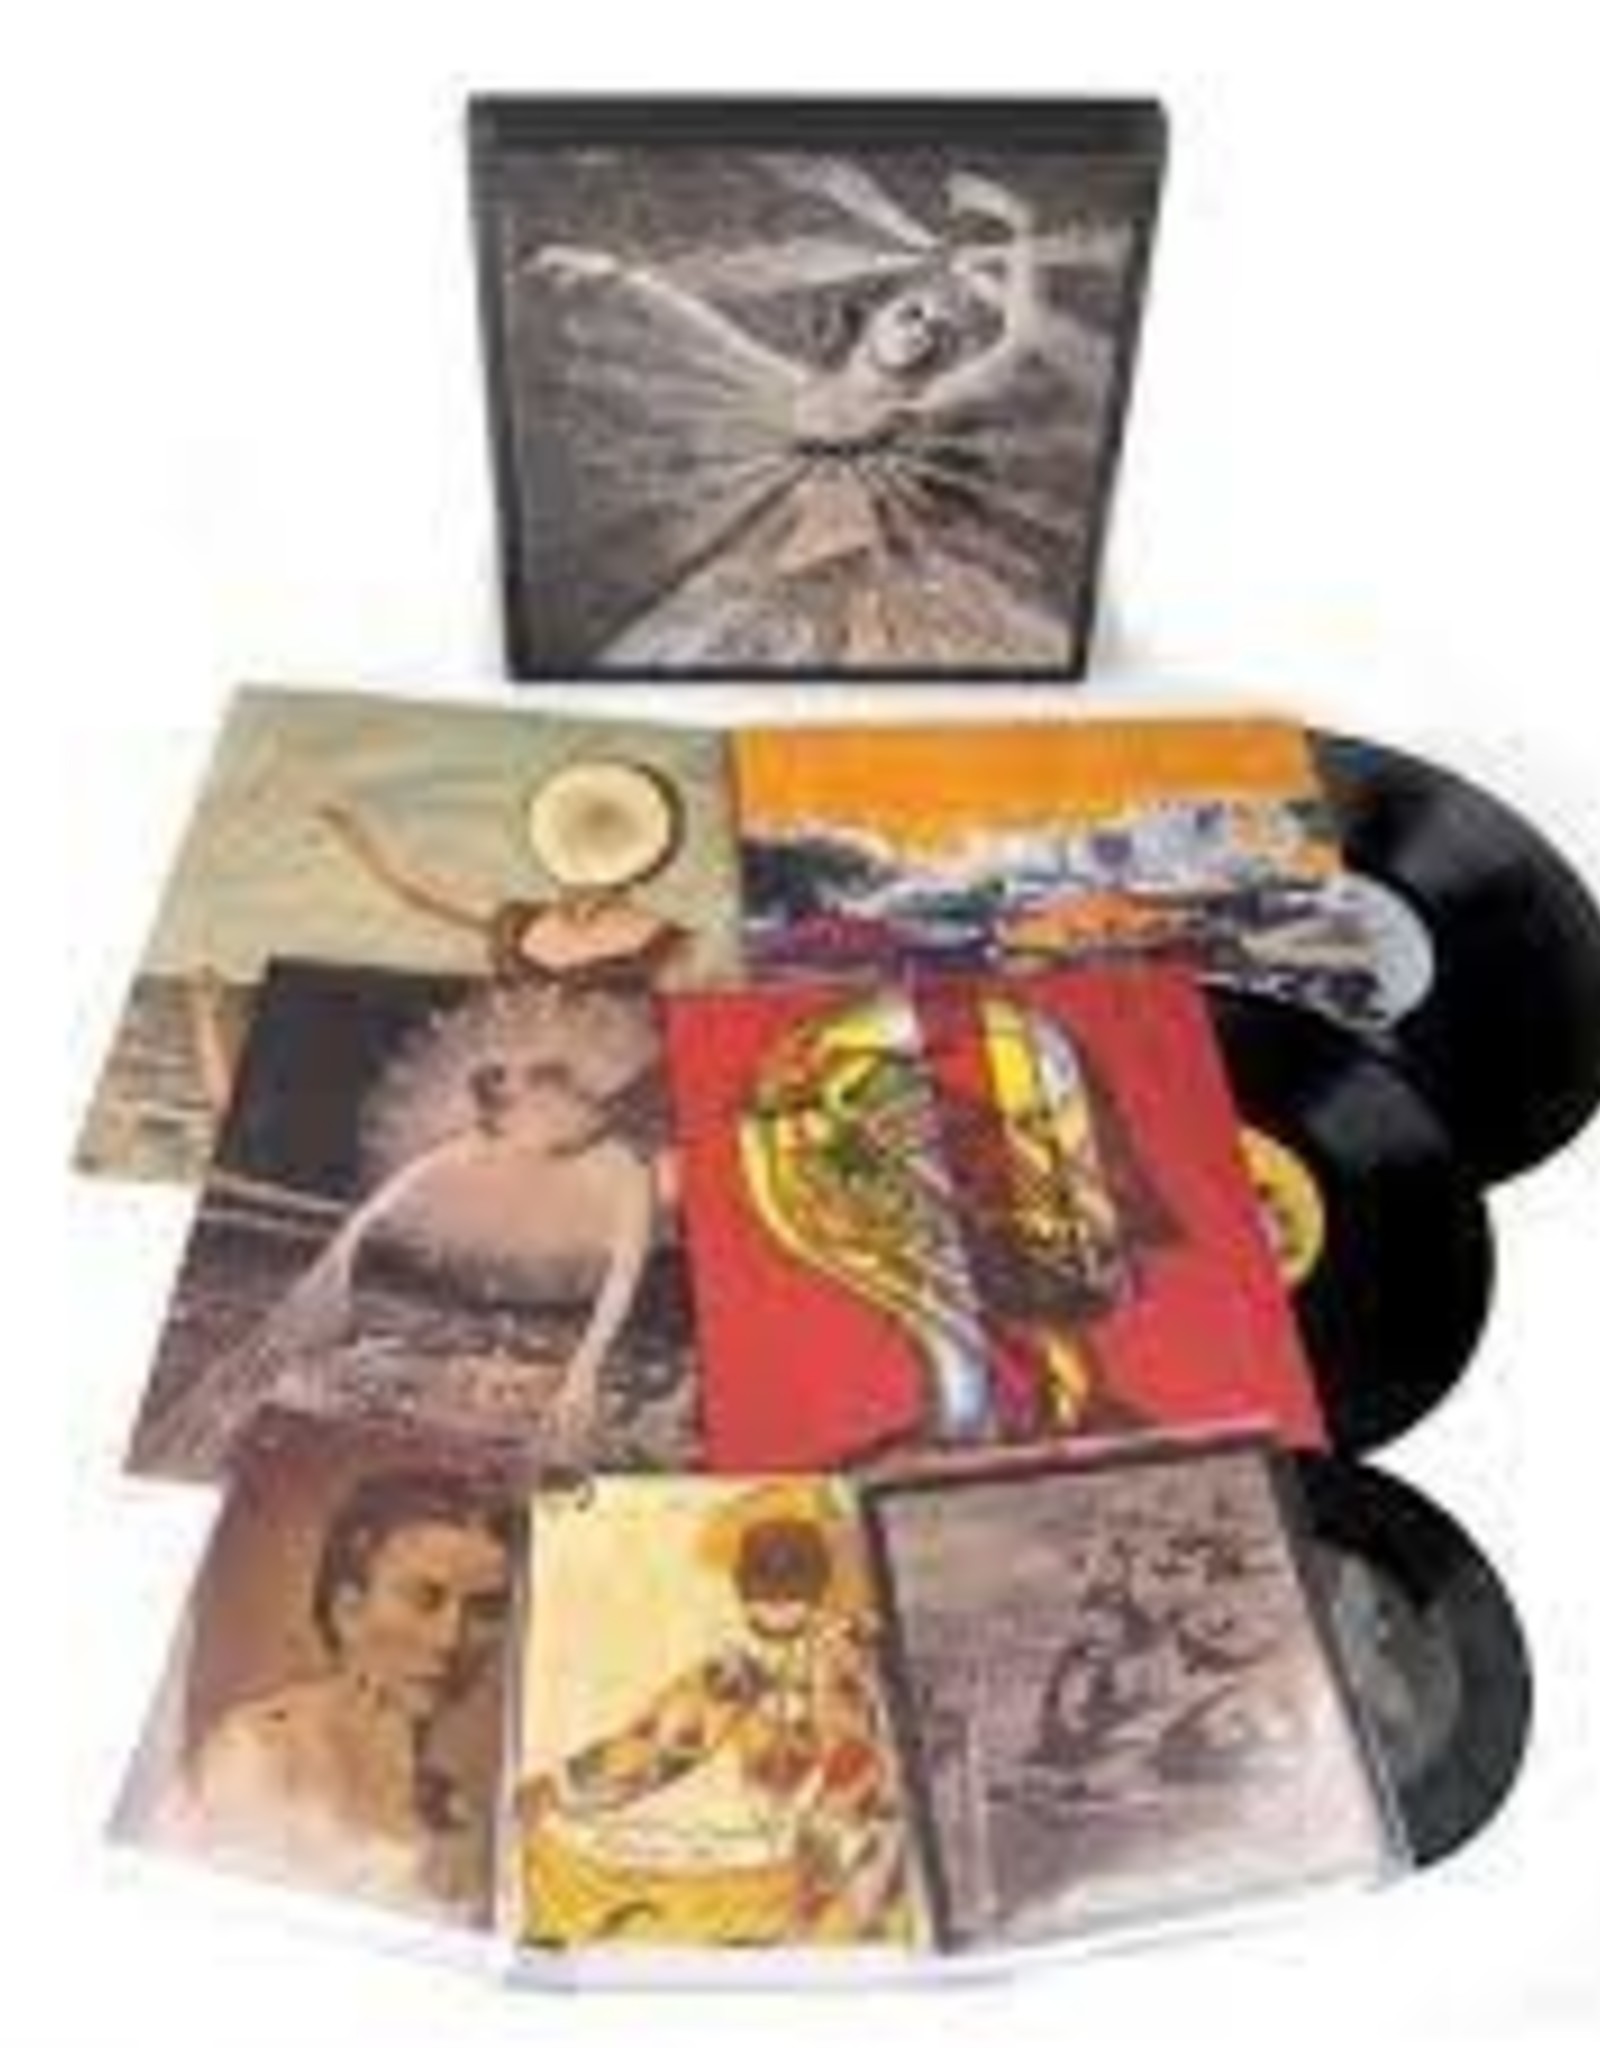 Neutral Milk Hotel - The Collected Works of Neutral Milk Hotel Box Set